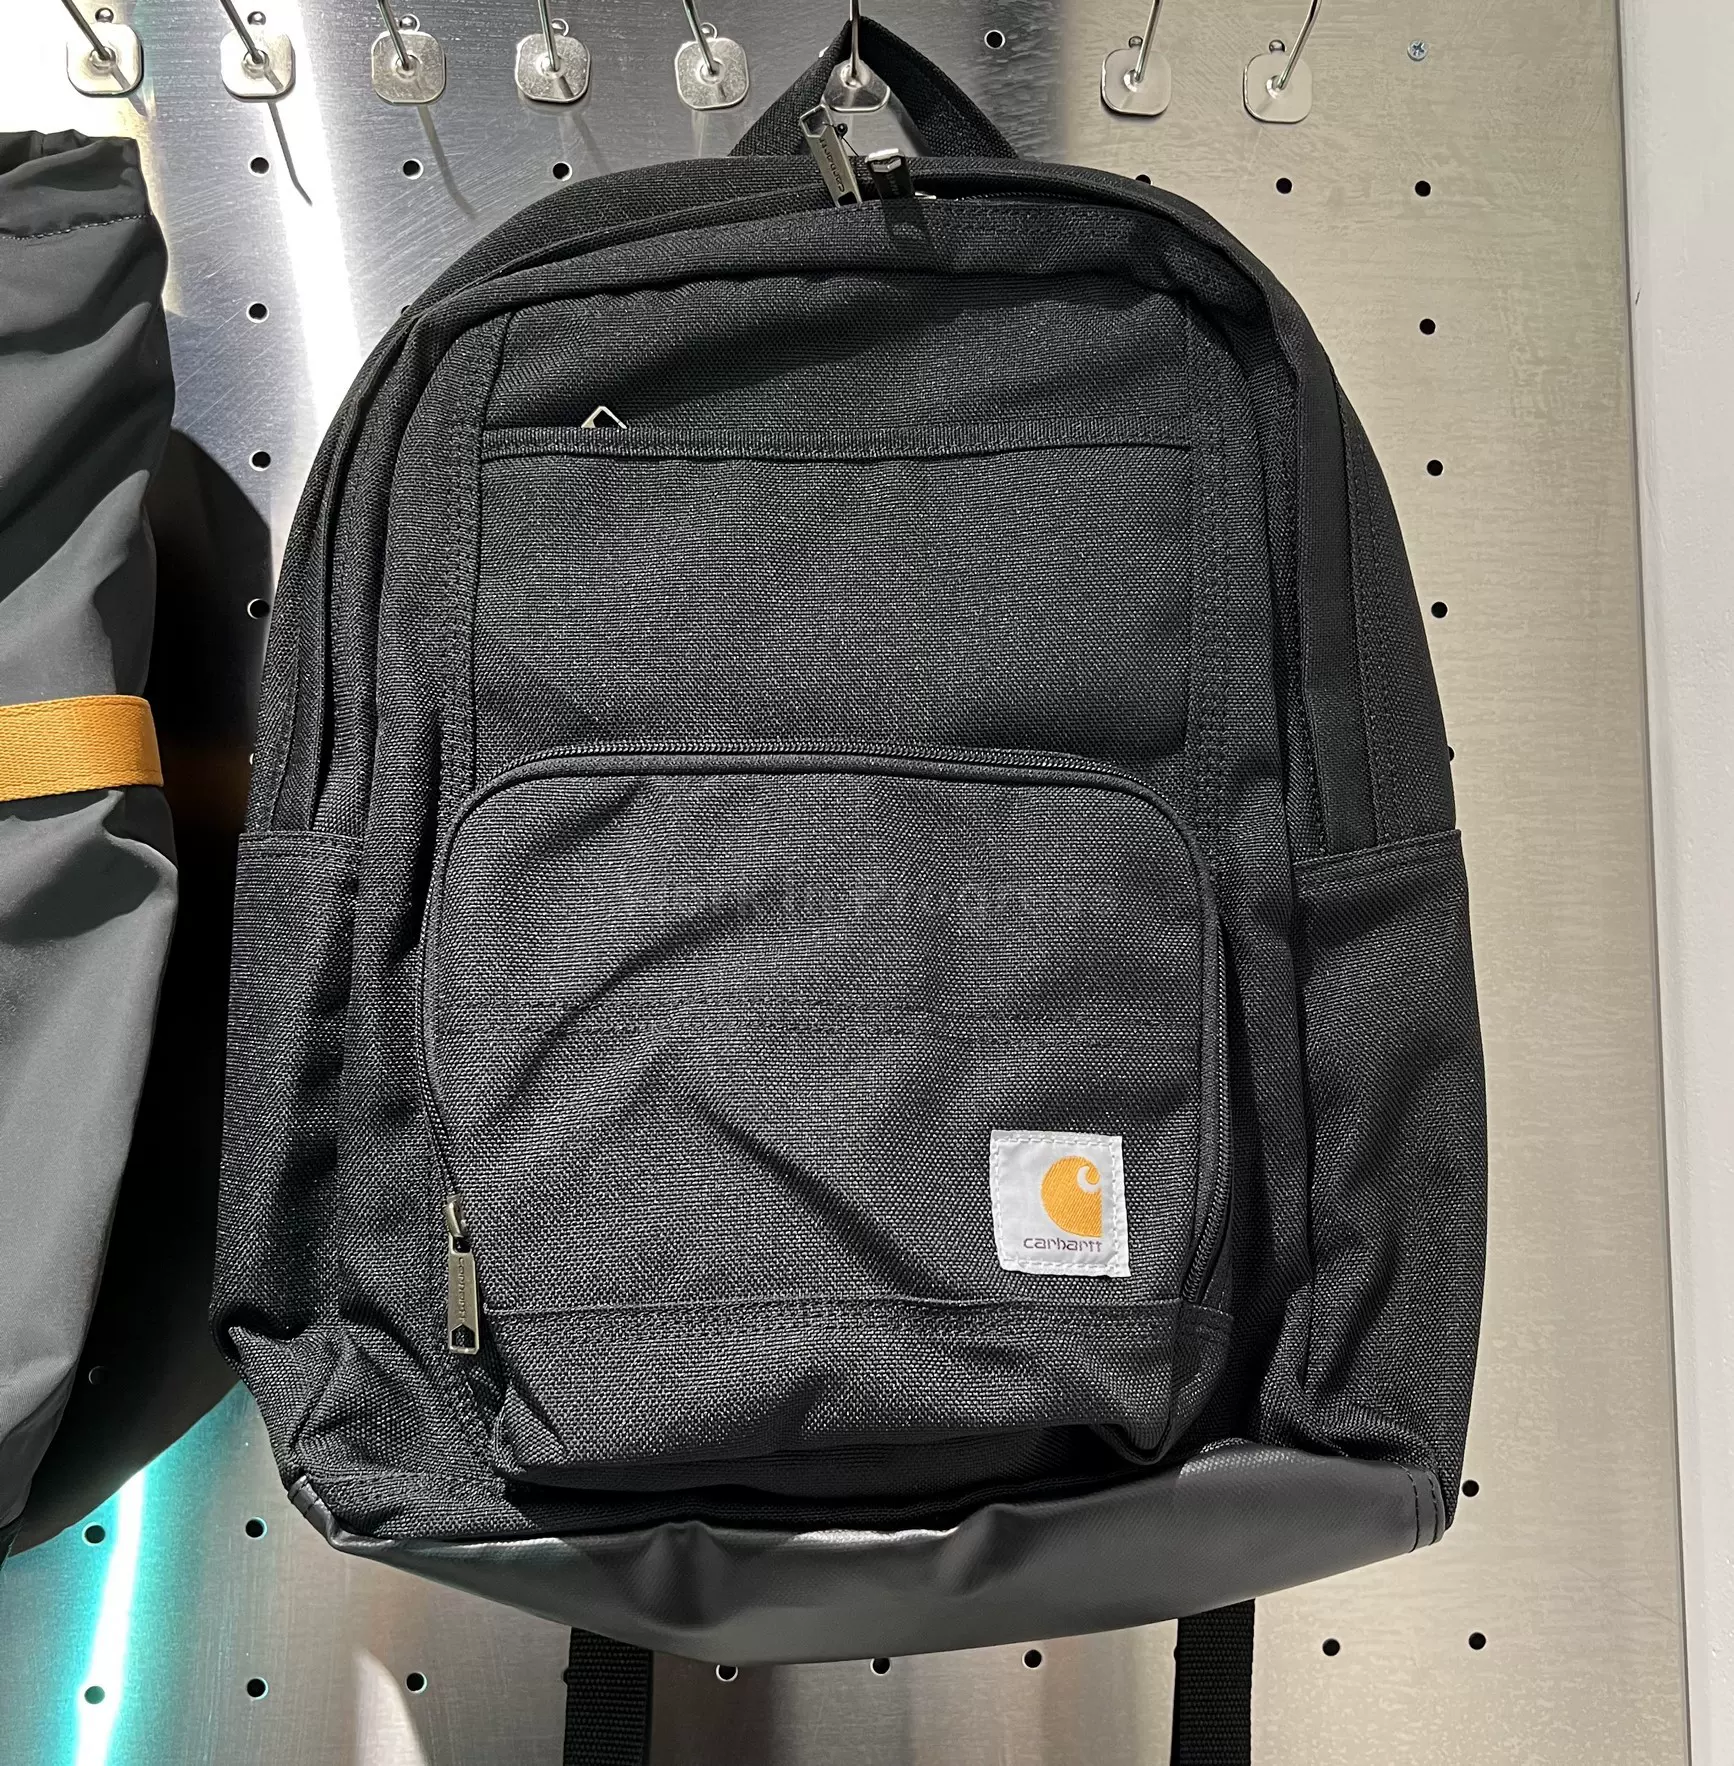 My old man knows me too well. A belated birthday present: Carhartt WIP  Payton Backpack. : r/Carhartt